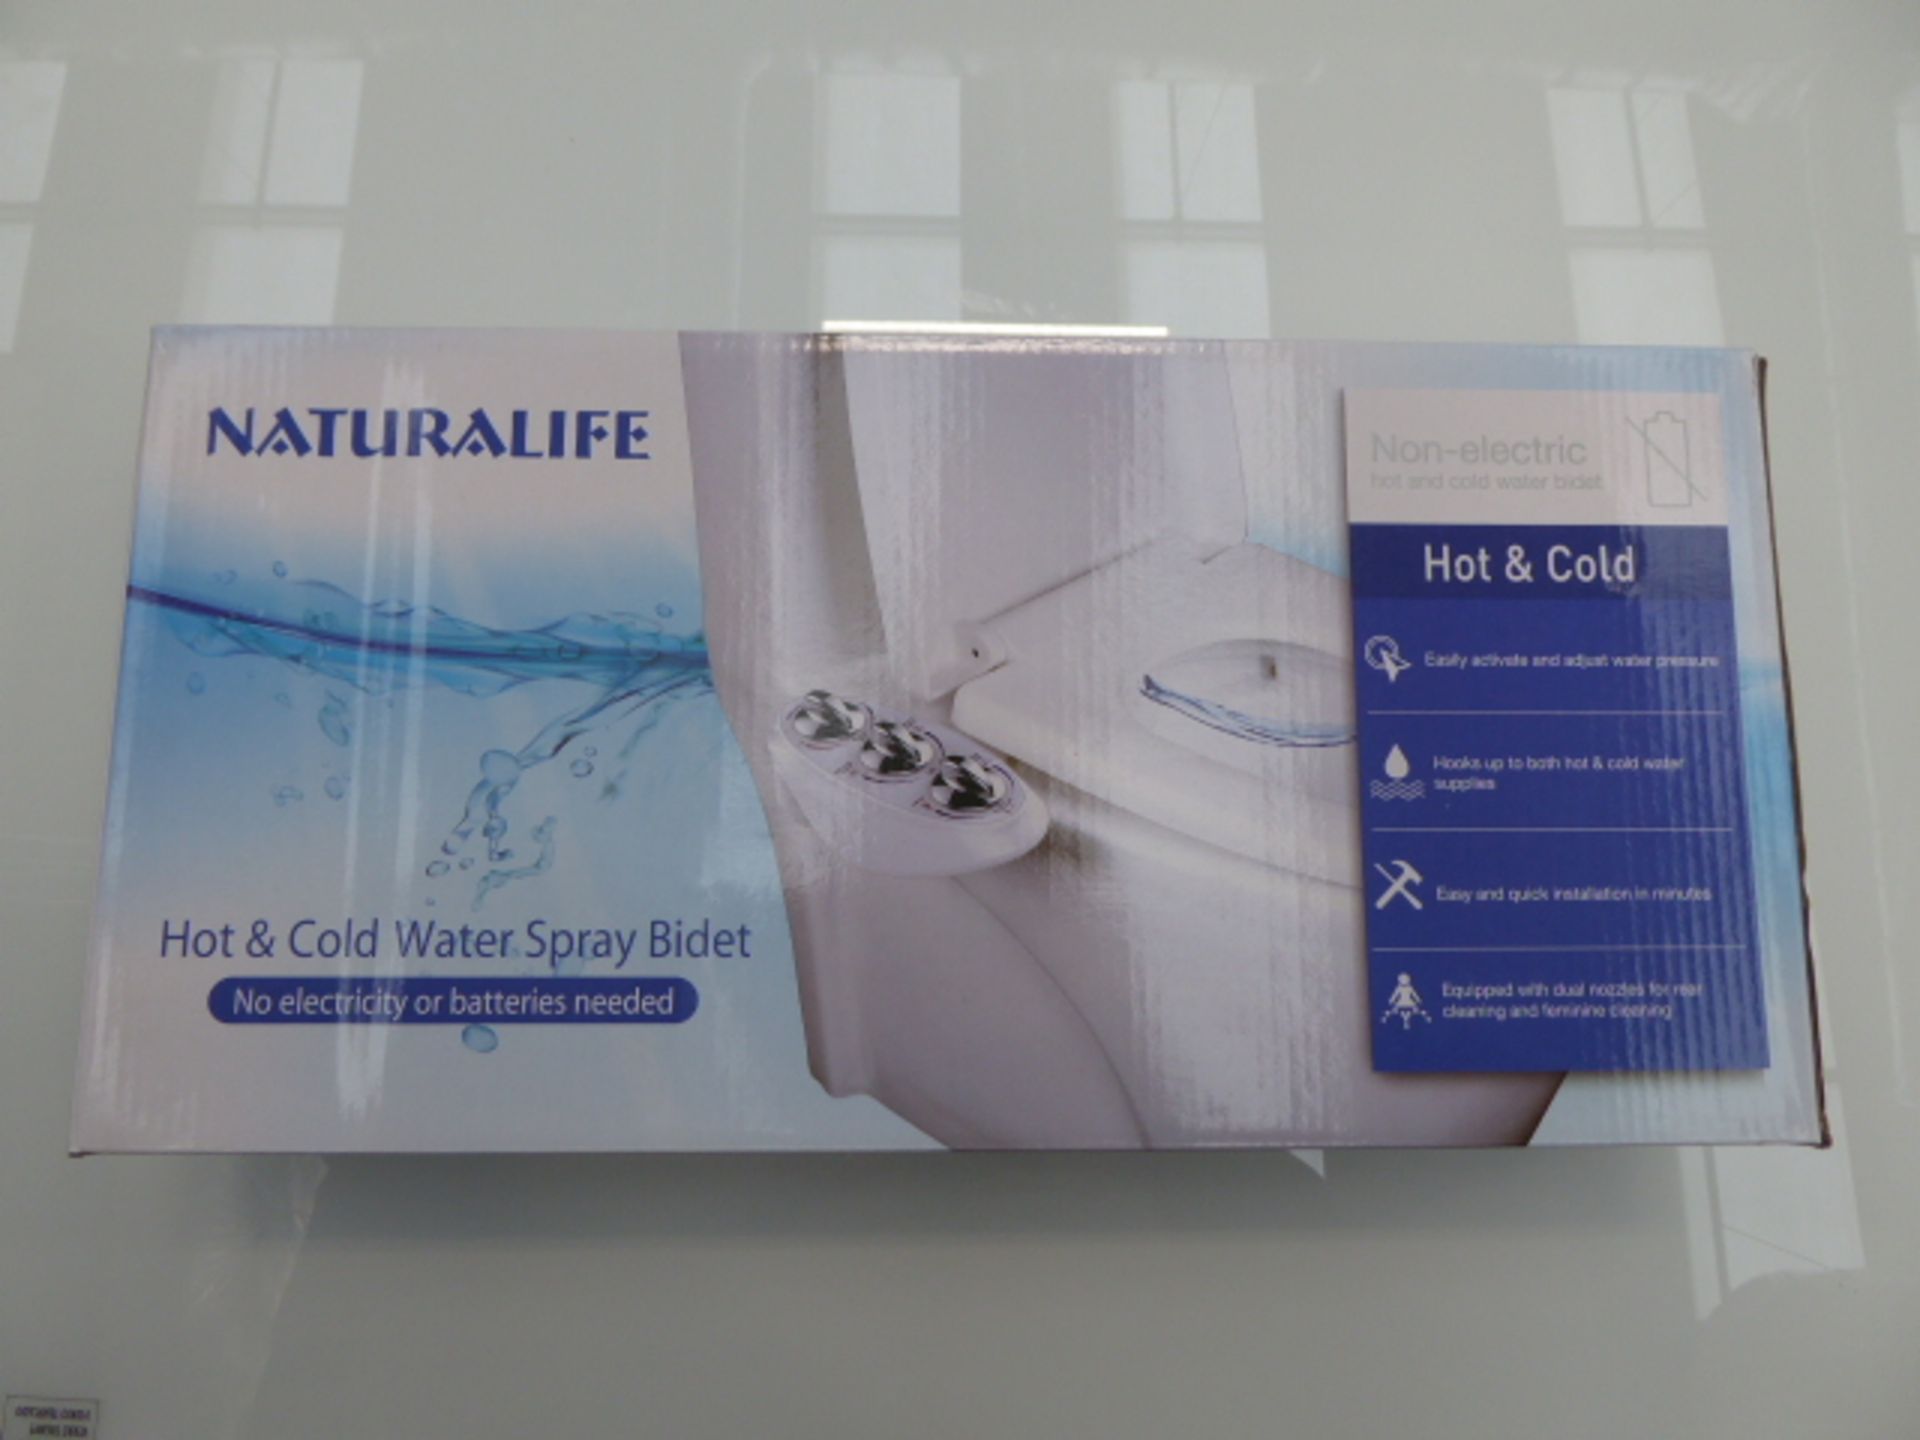 2 Nutralife hot and cold water spray bidets